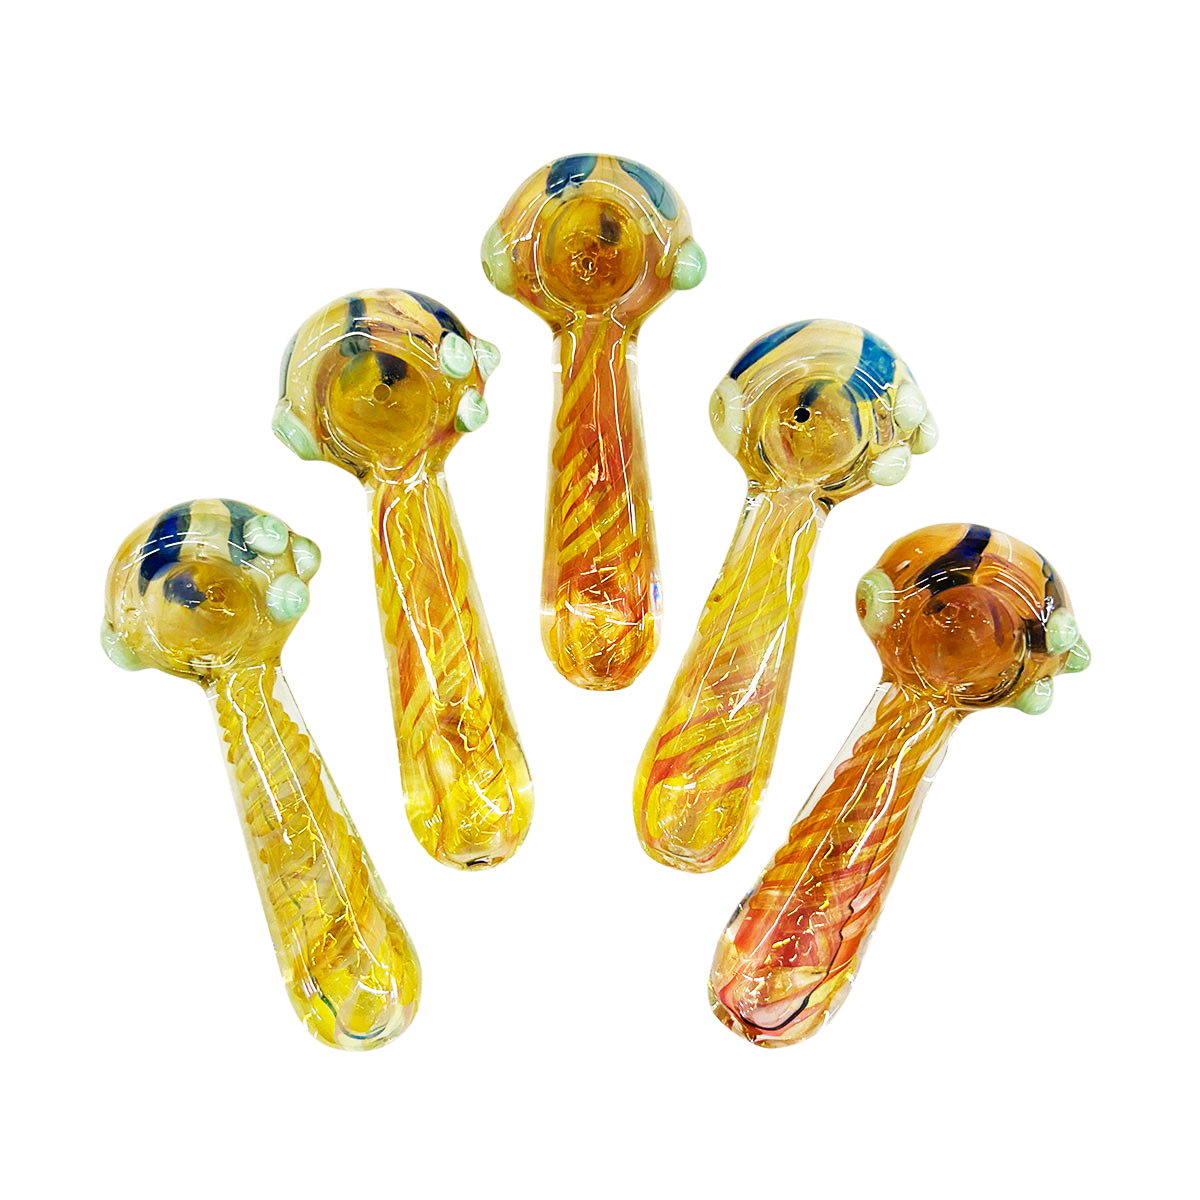 4" Hand Pipe Gold Silver Fume Glass Swirling Art